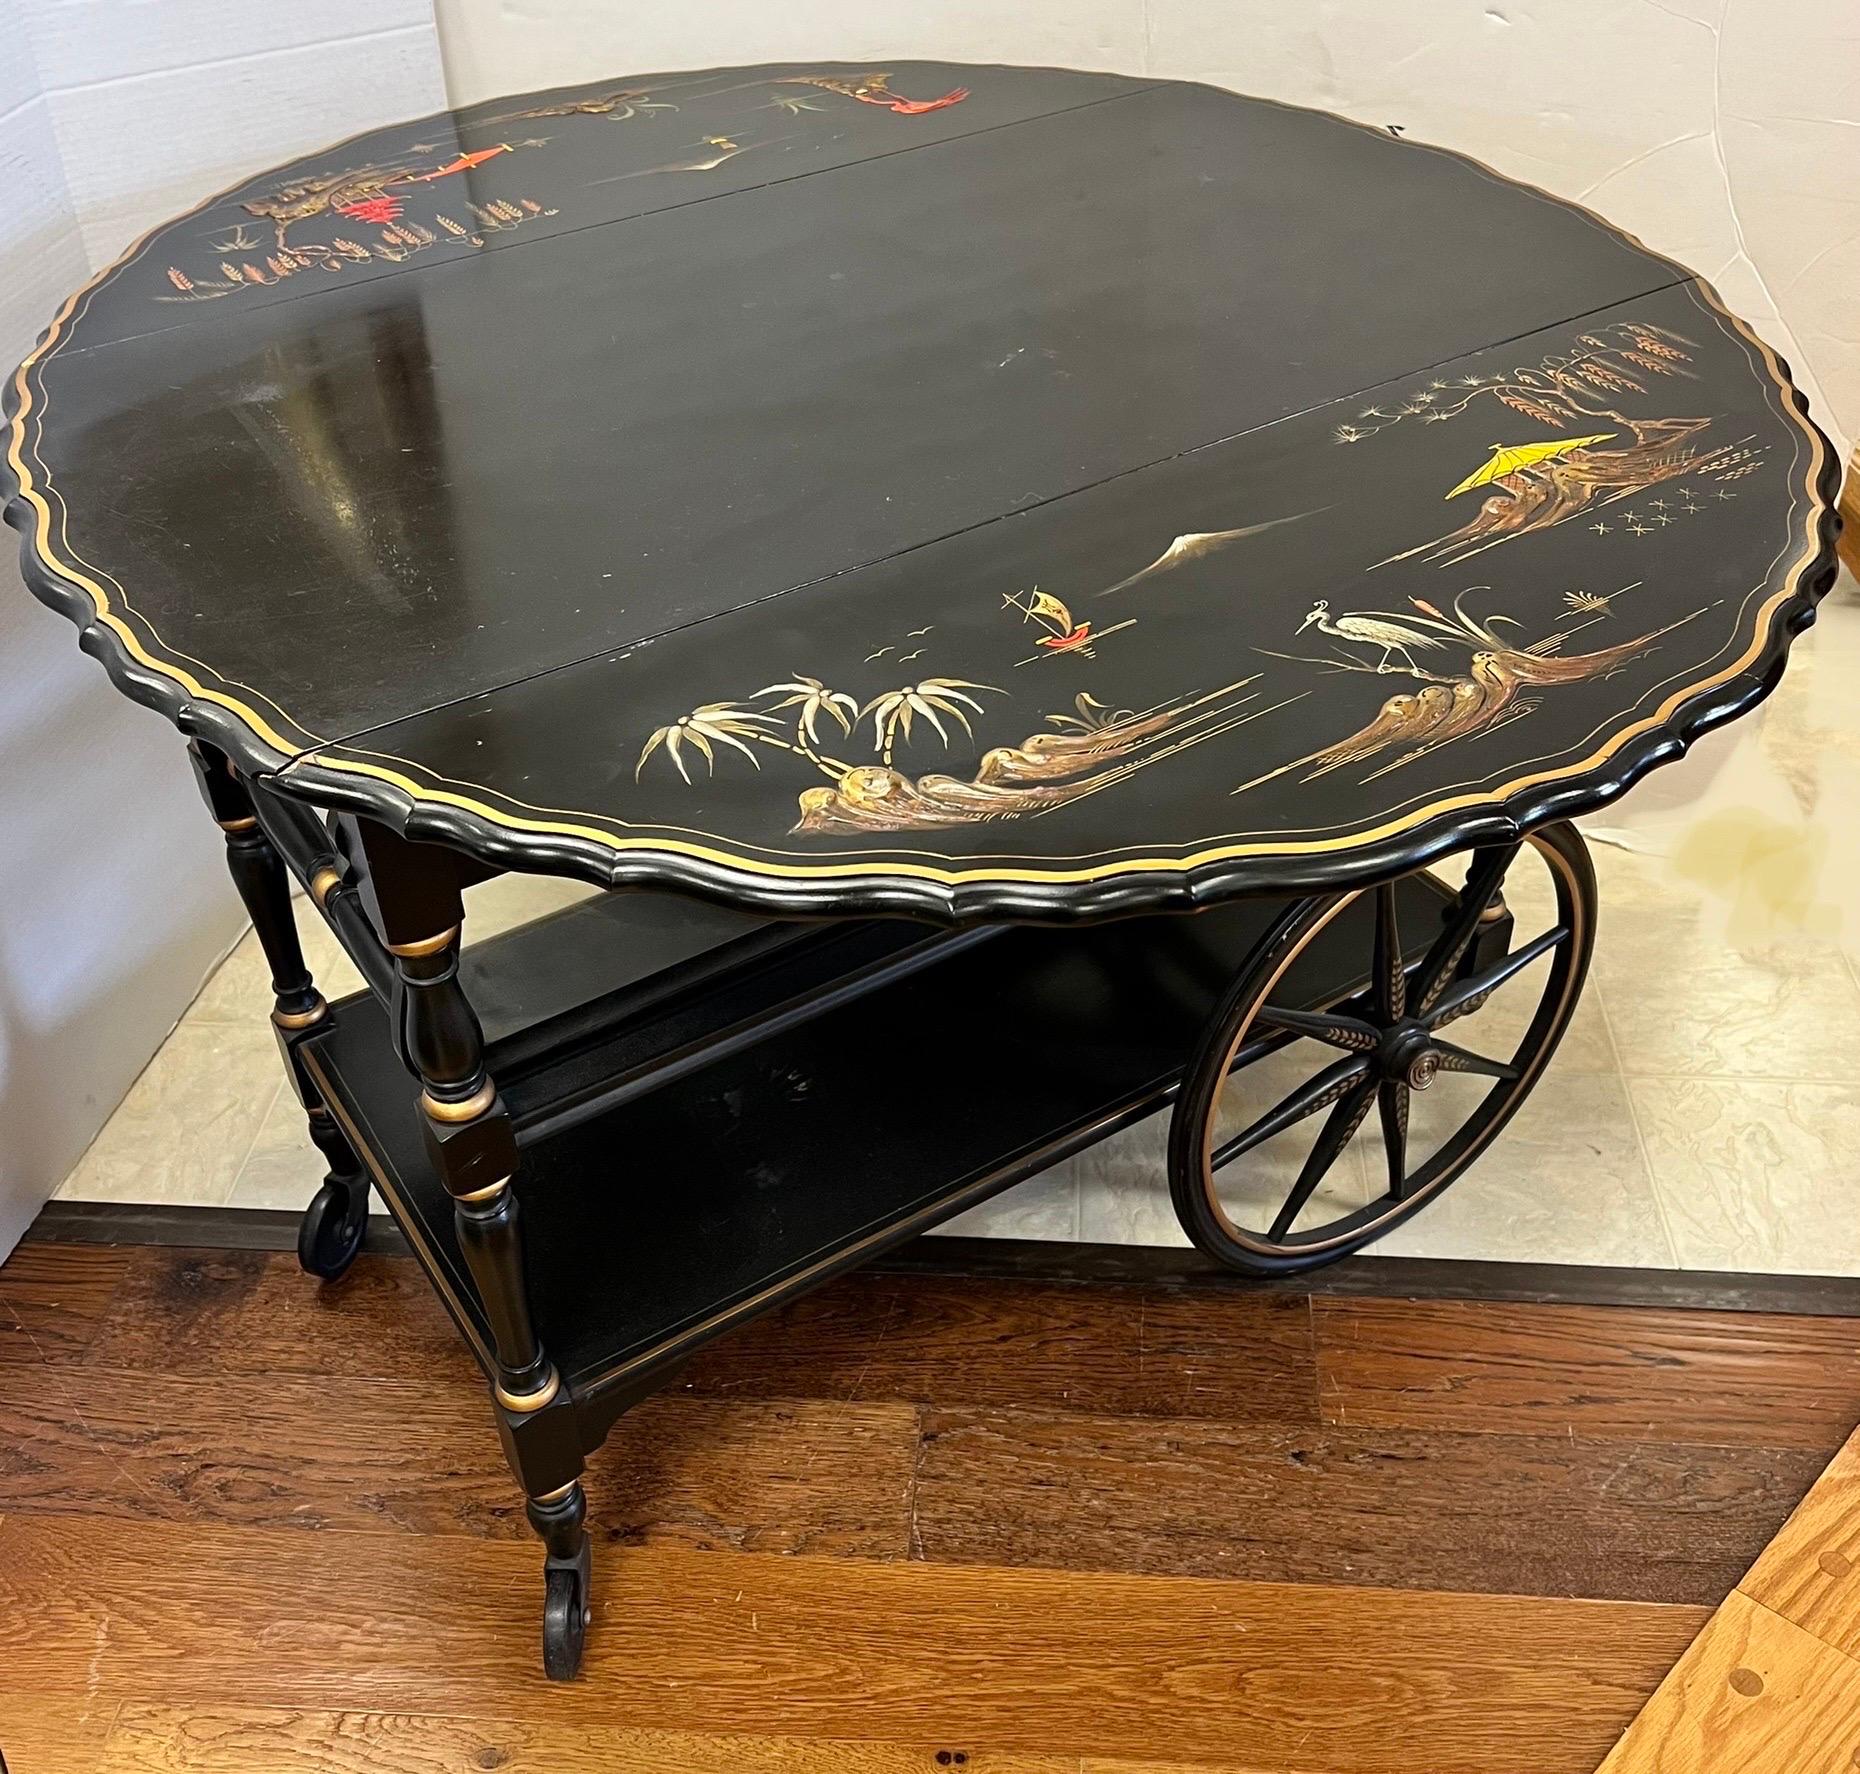 Beautiful vintage black lacquered bar cart expands to a round table when sides are raised. Elegantly hand painted with a classic Chinese landscape motif over the lustrous black lacquer surface. The large spoke wheels paired with small castors in the